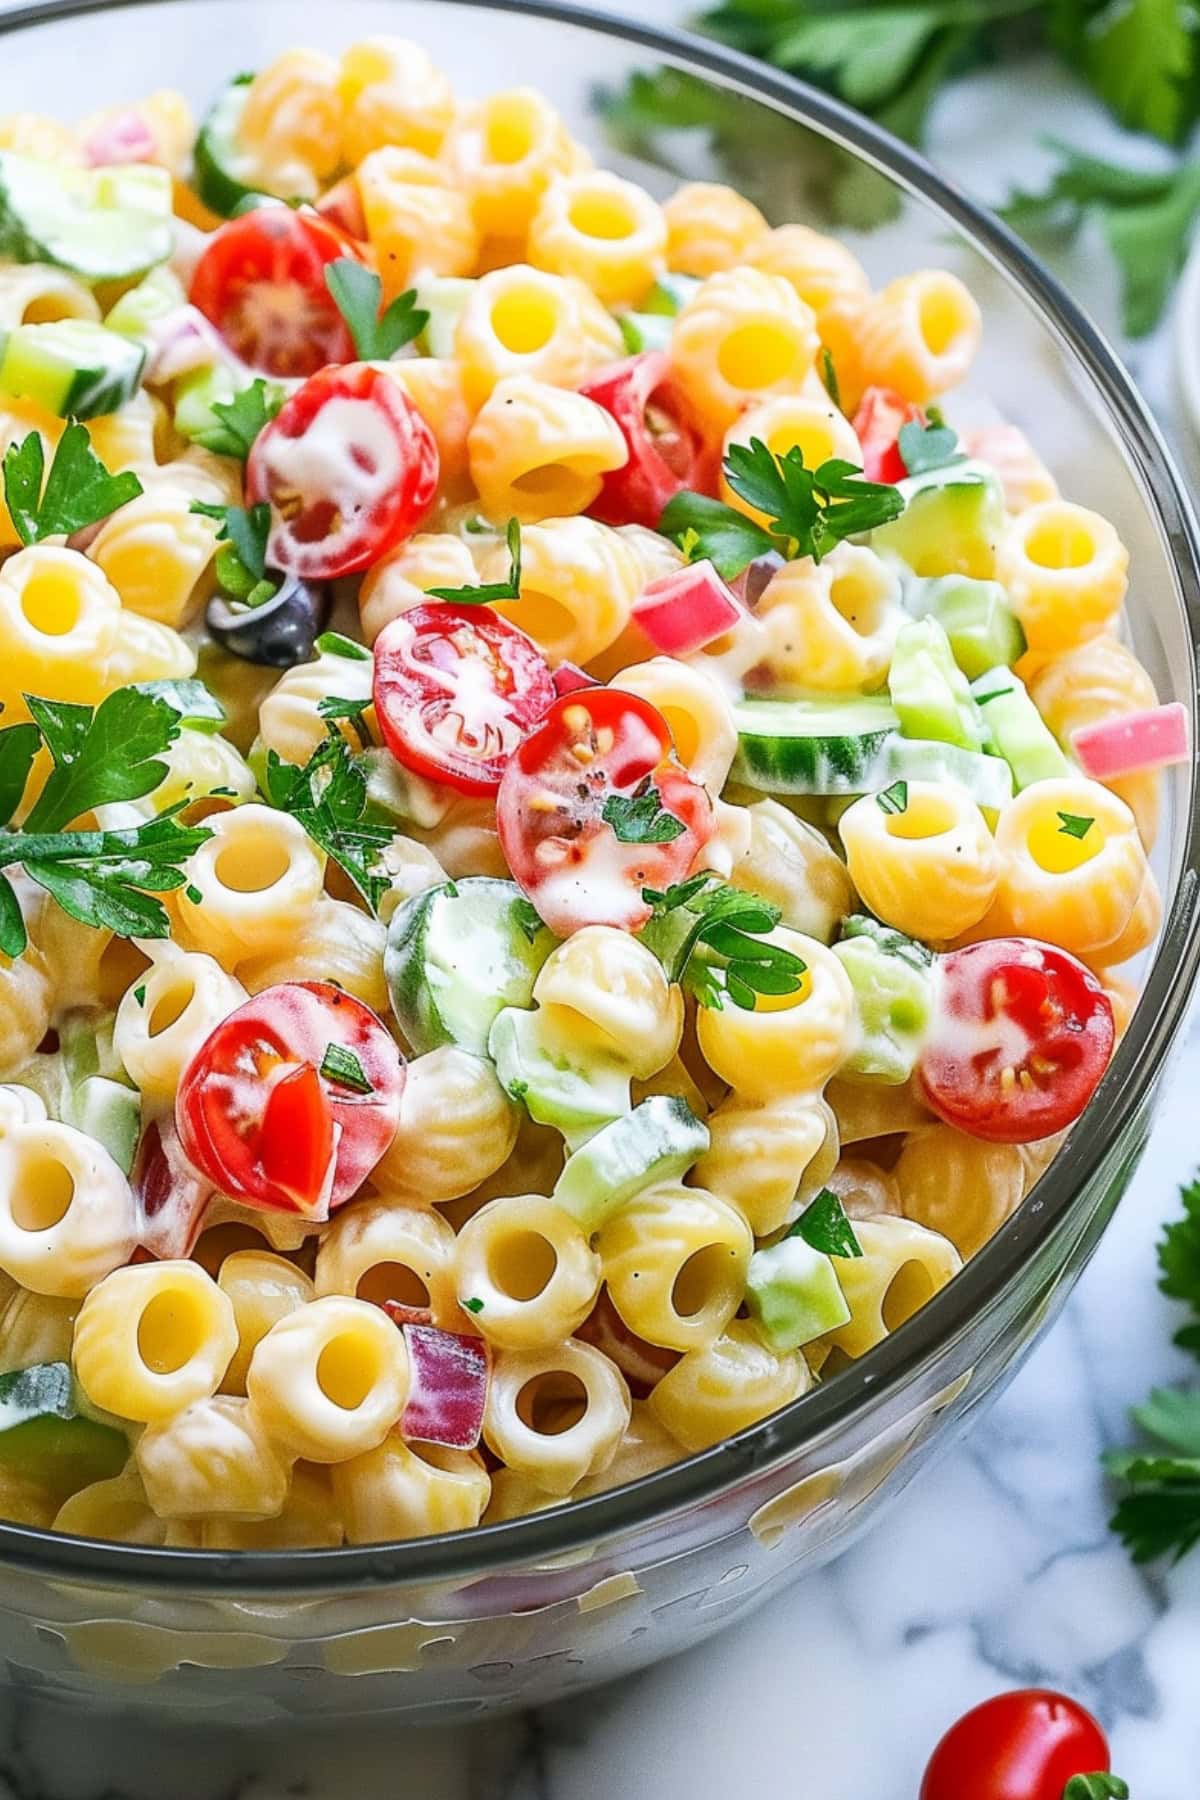 Pasta salad made with ditalini pasta, cherry tomatoes, cucumber, bell pepper, and red onion and creamy dressing tossed in a glass bowl.